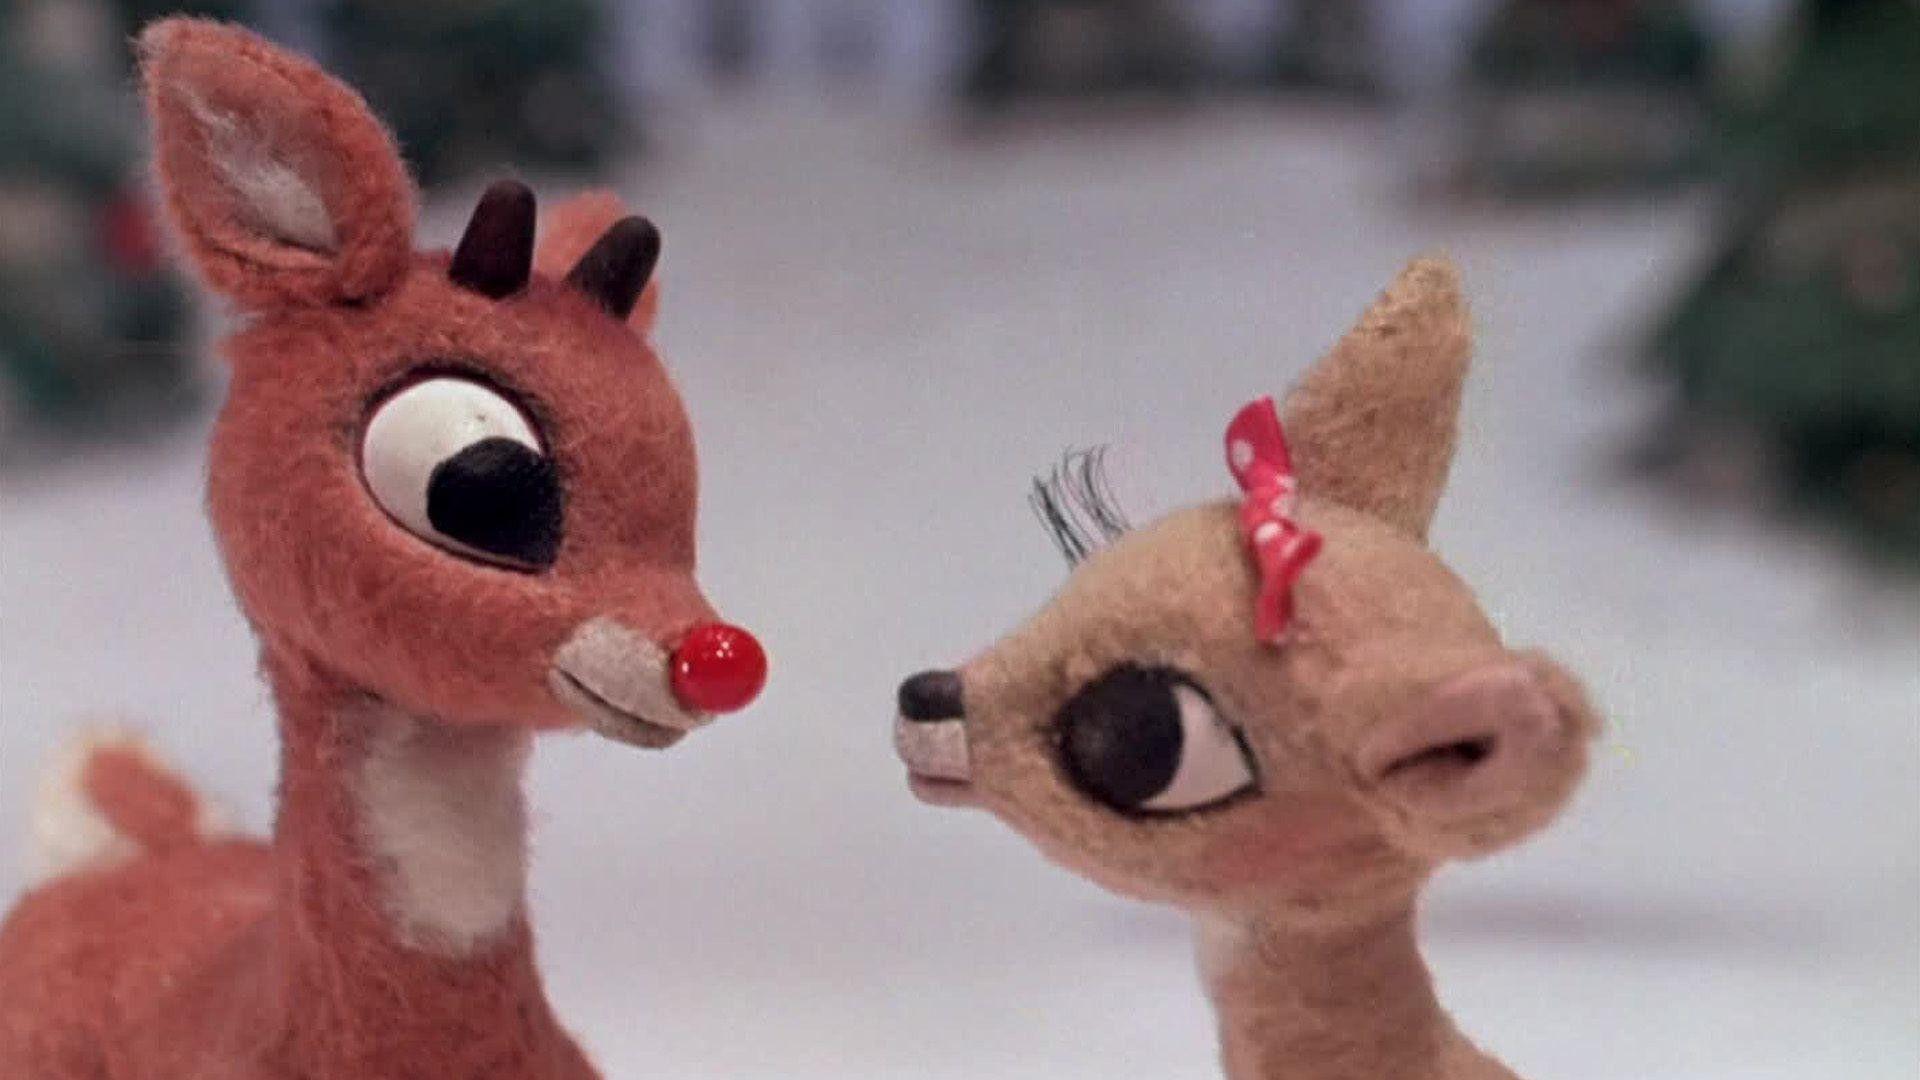 Download Rudolph Reindeer wallpapers for mobile phone free Rudolph  Reindeer HD pictures